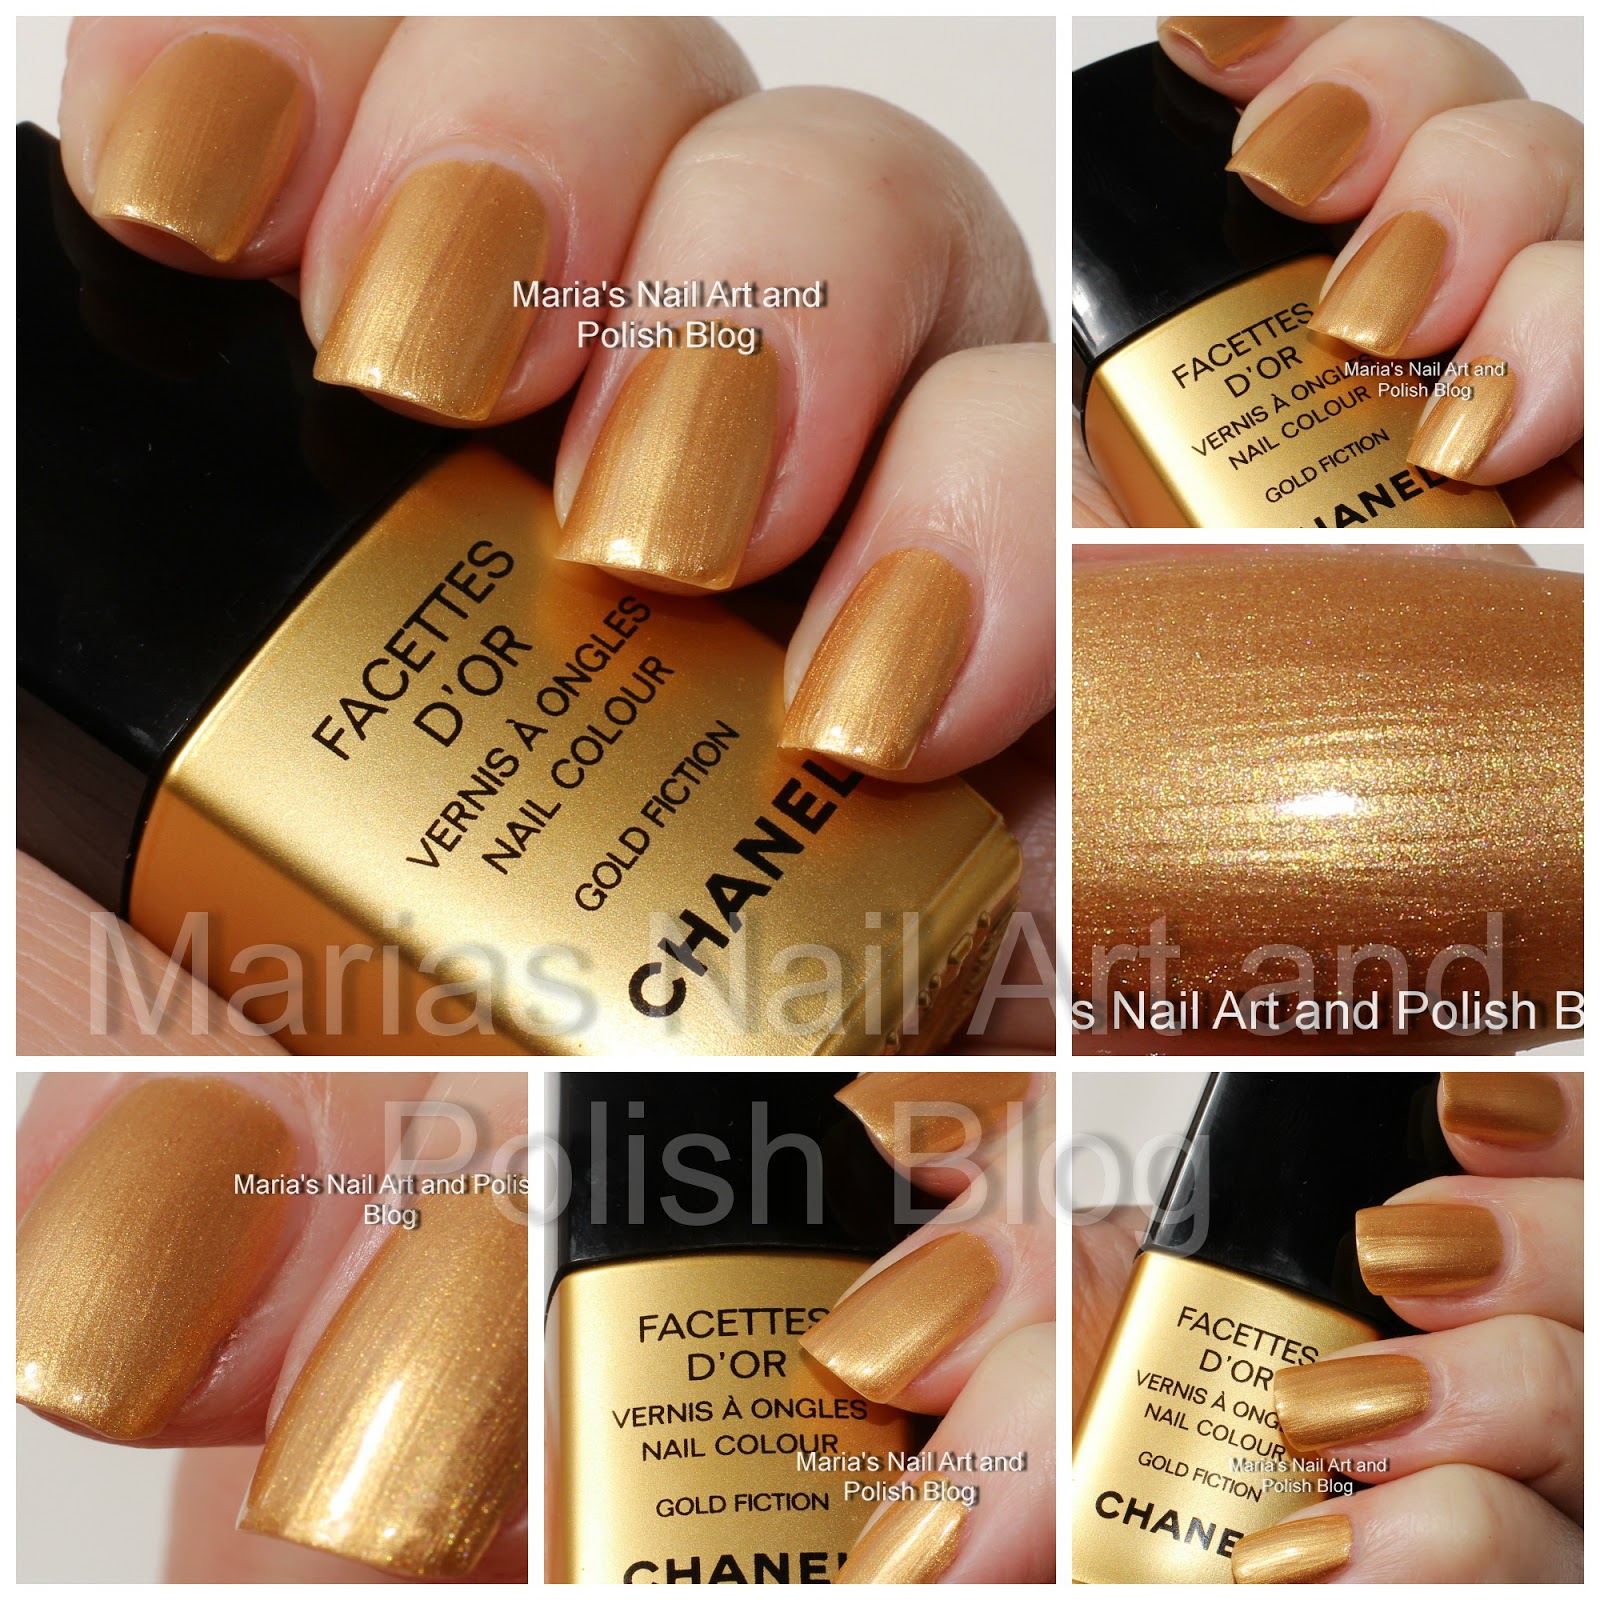 Marias Nail Art and Polish Blog: Chanel Gold swatches (Facettes D'Or Gold Rush collection - comparisons